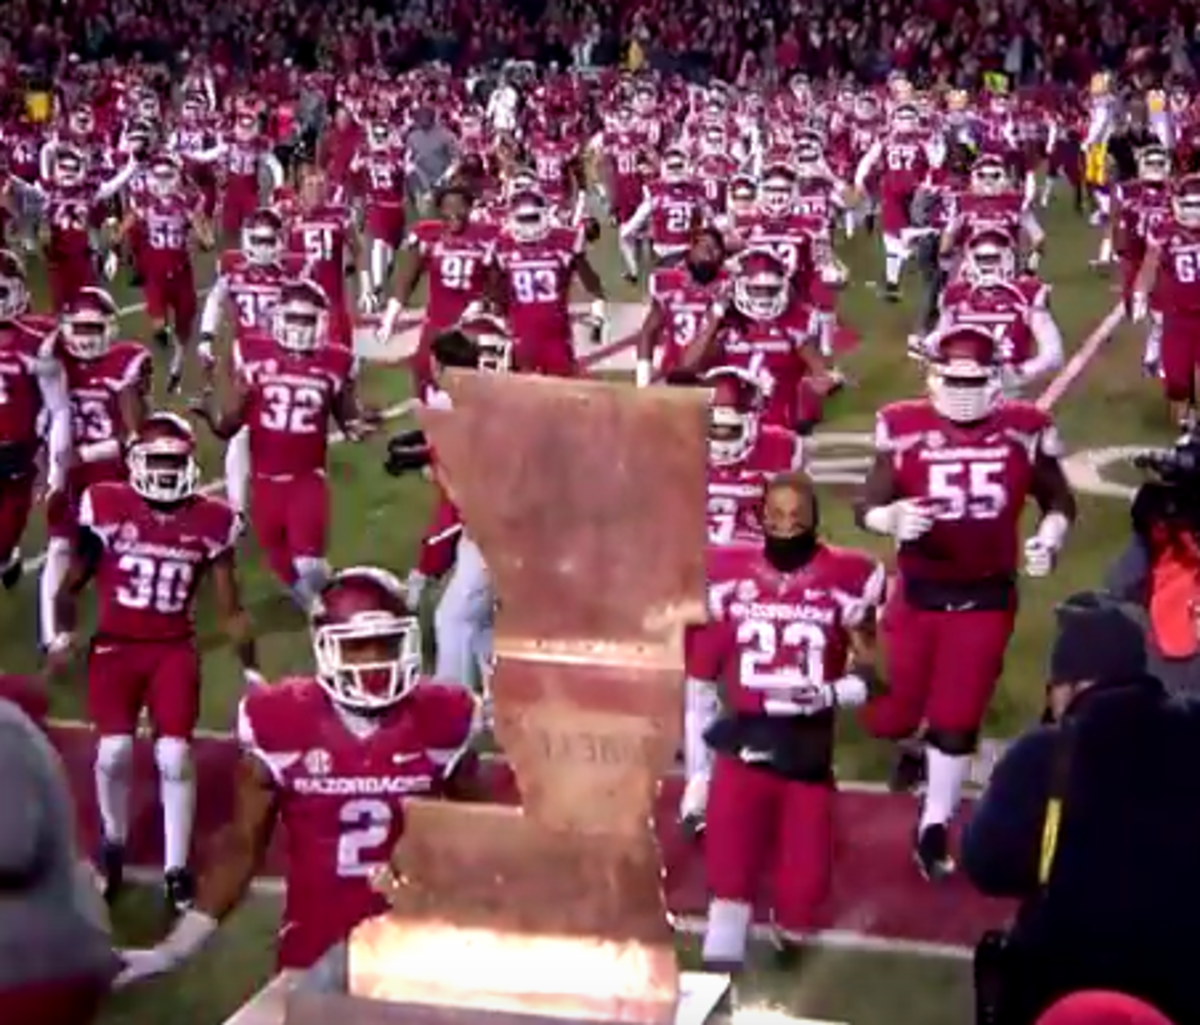 Arkansas players run over to the boot trophy.